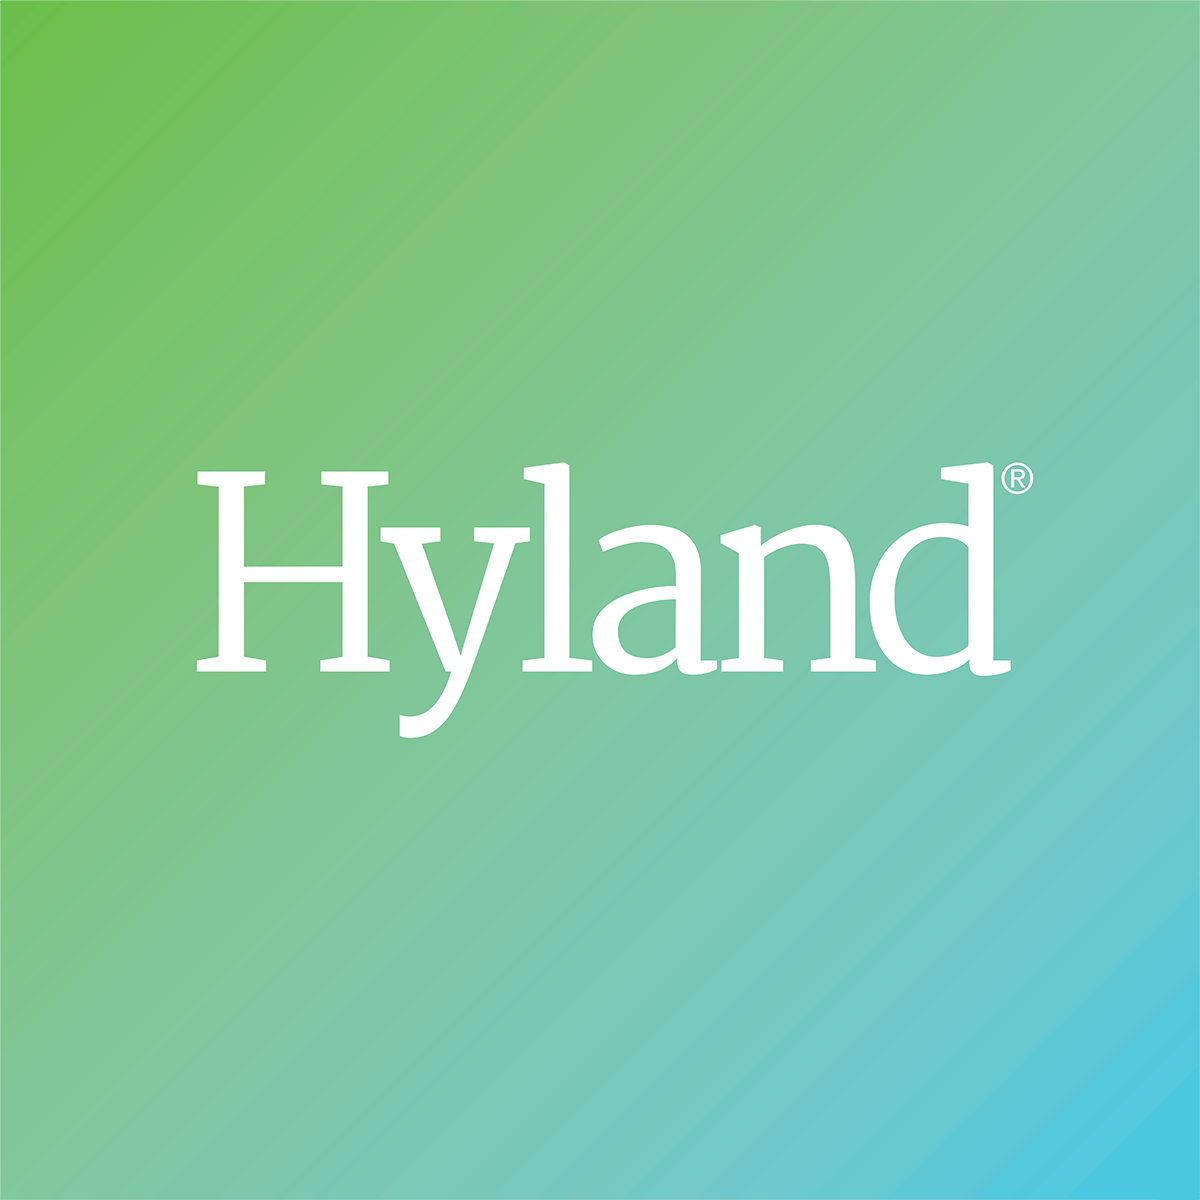 Hyland's purchase of Alfresco consolidates its position in the ECP market.